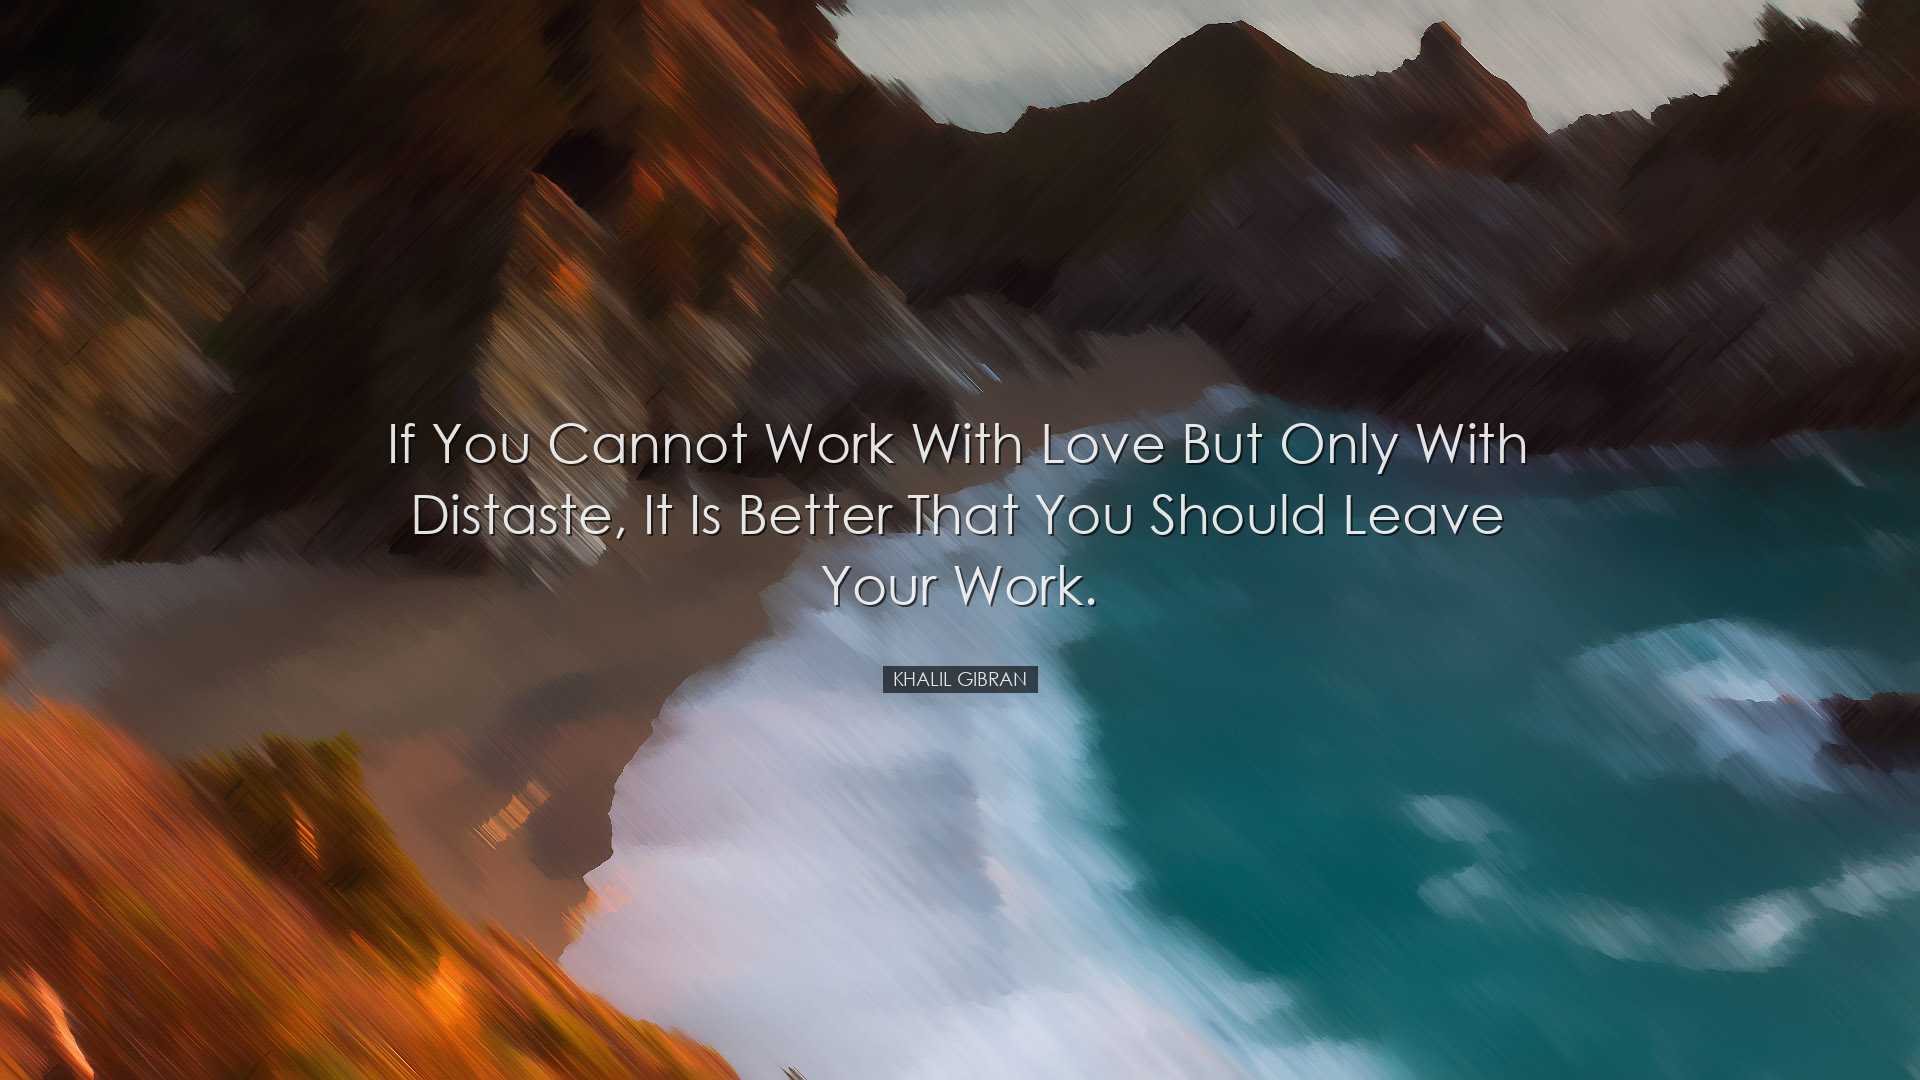 If you cannot work with love but only with distaste, it is better